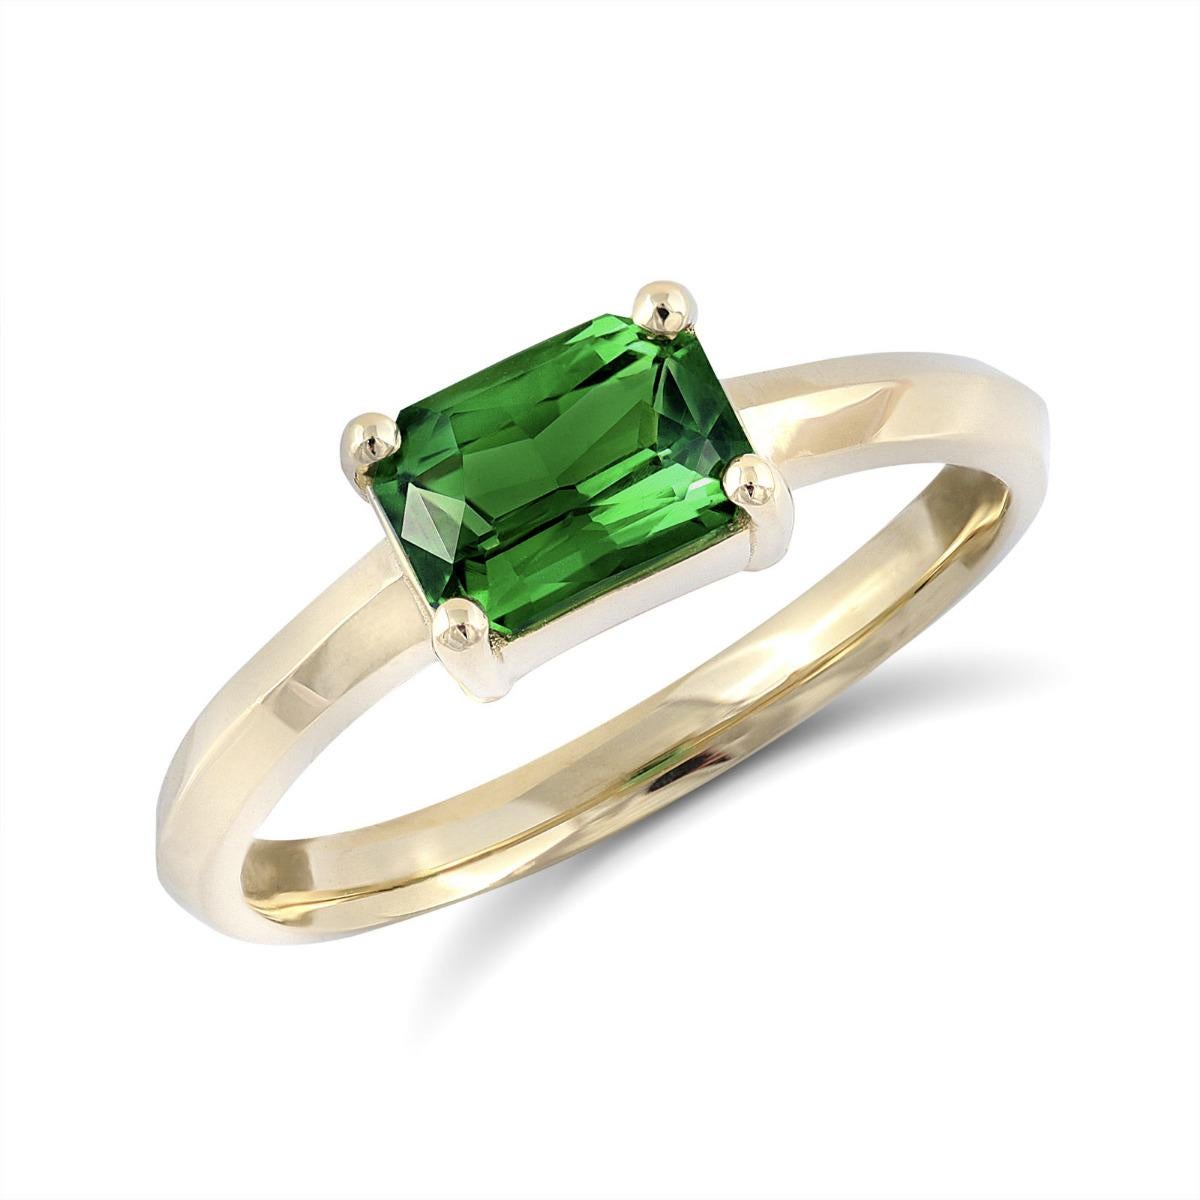 1.11 Carats Tsavorite set in 14K Yellow Gold Ring In New Condition For Sale In Los Angeles, CA